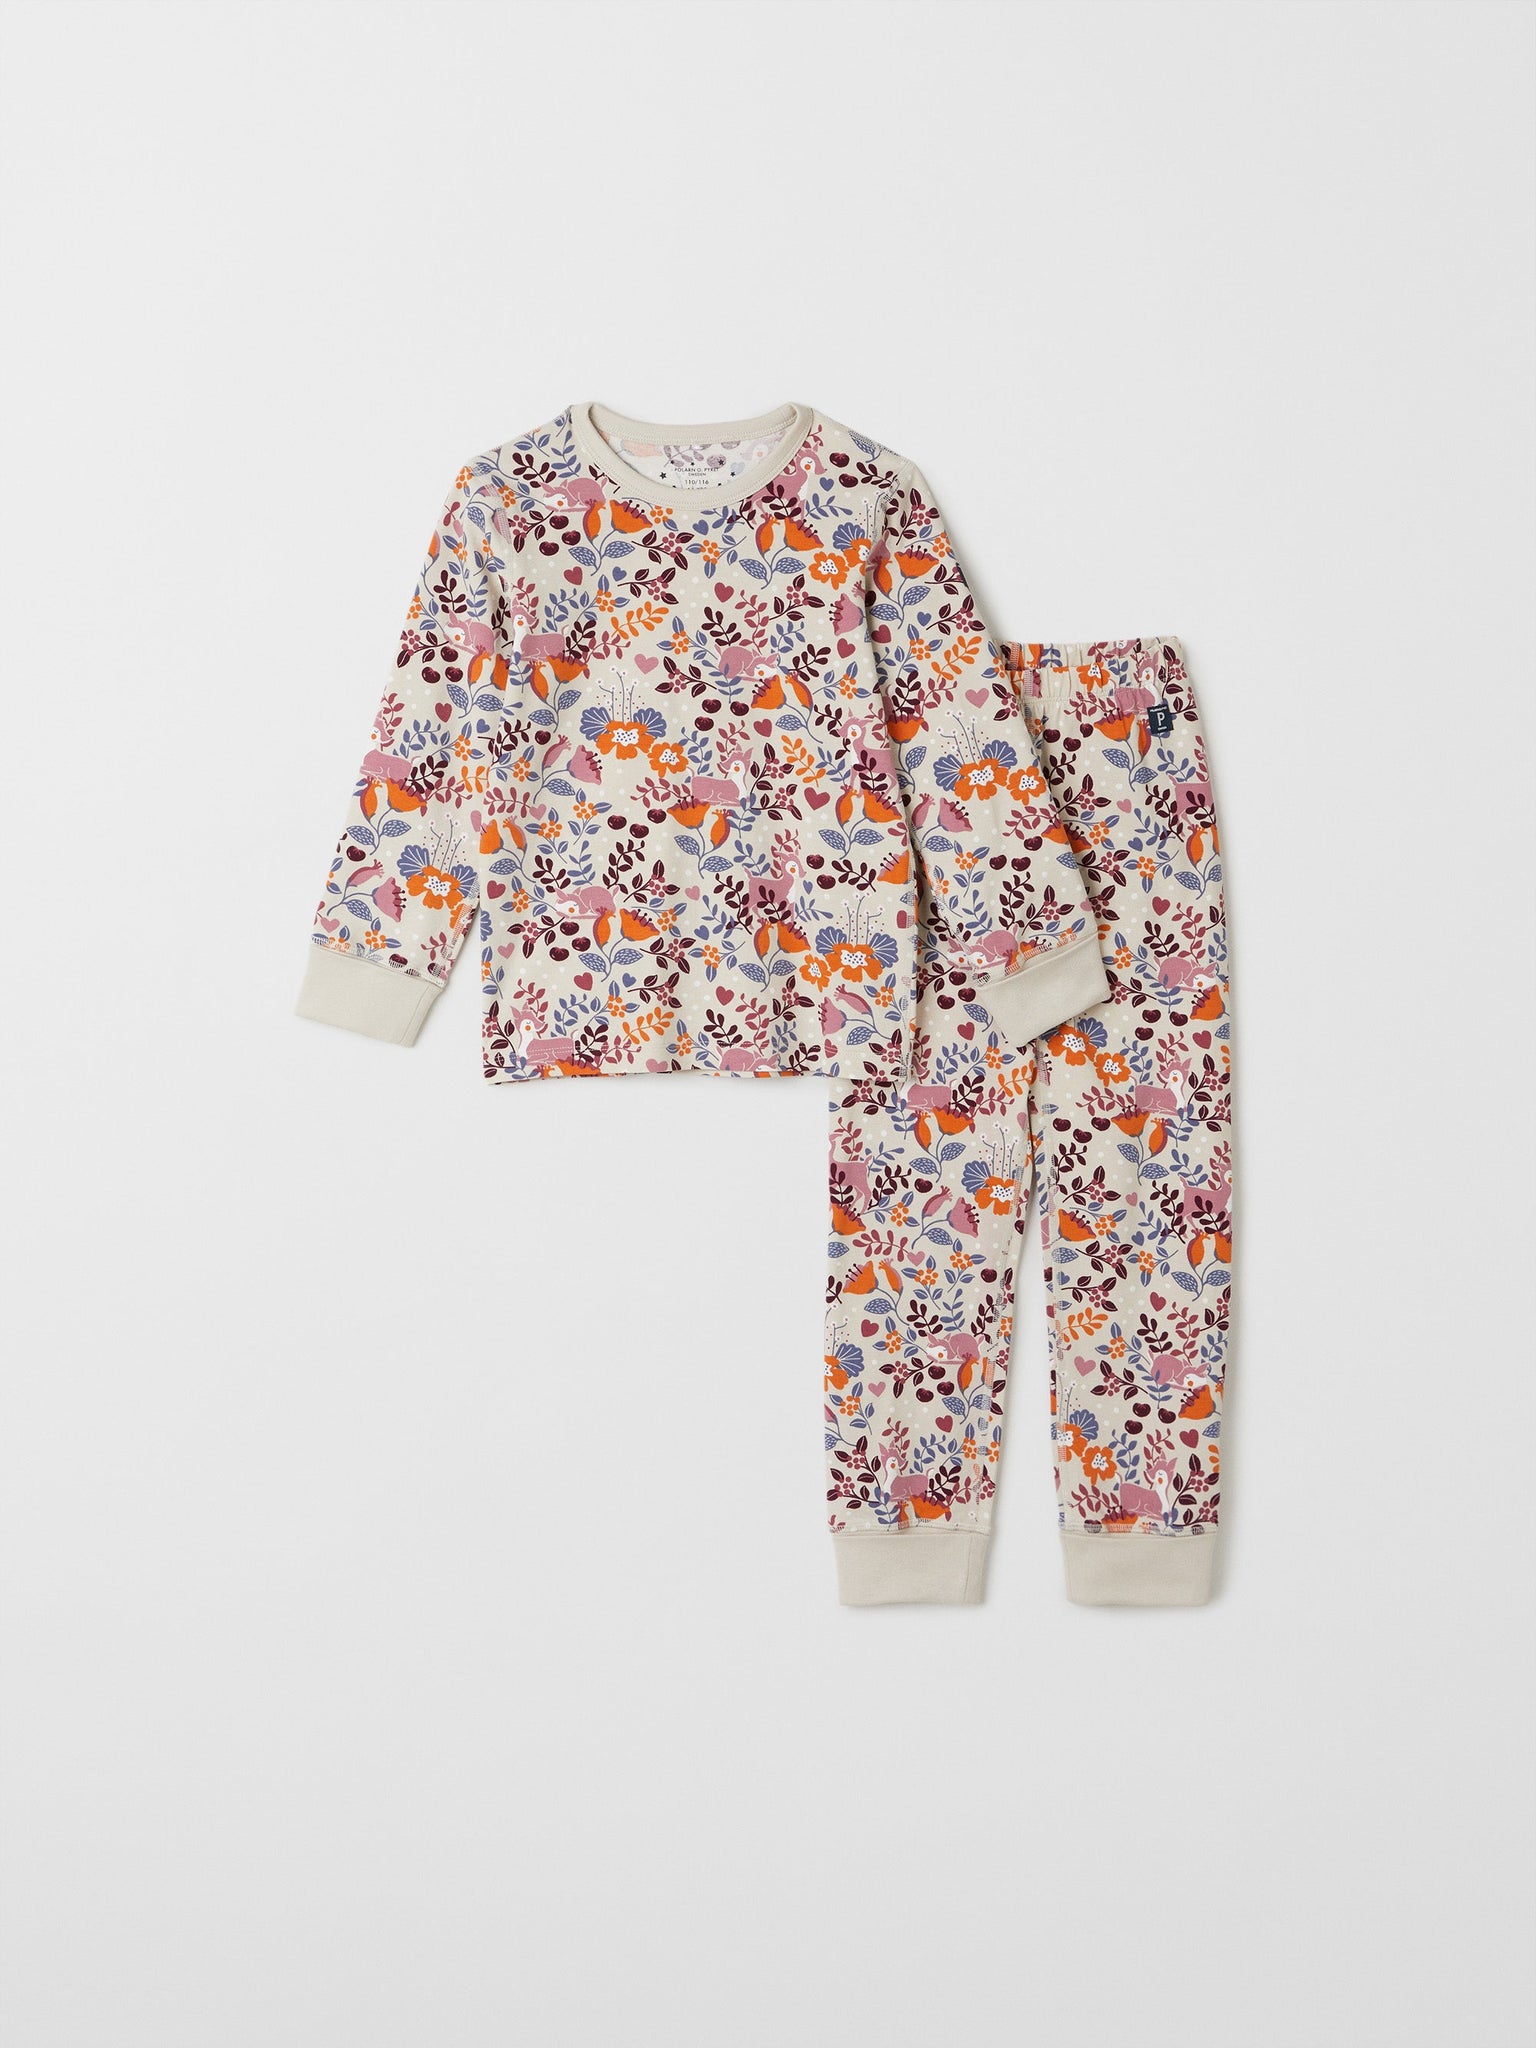 Floral Print Kids Beige Pyjamas from the Polarn O. Pyret kids collection. Nordic kids clothes made from sustainable sources.